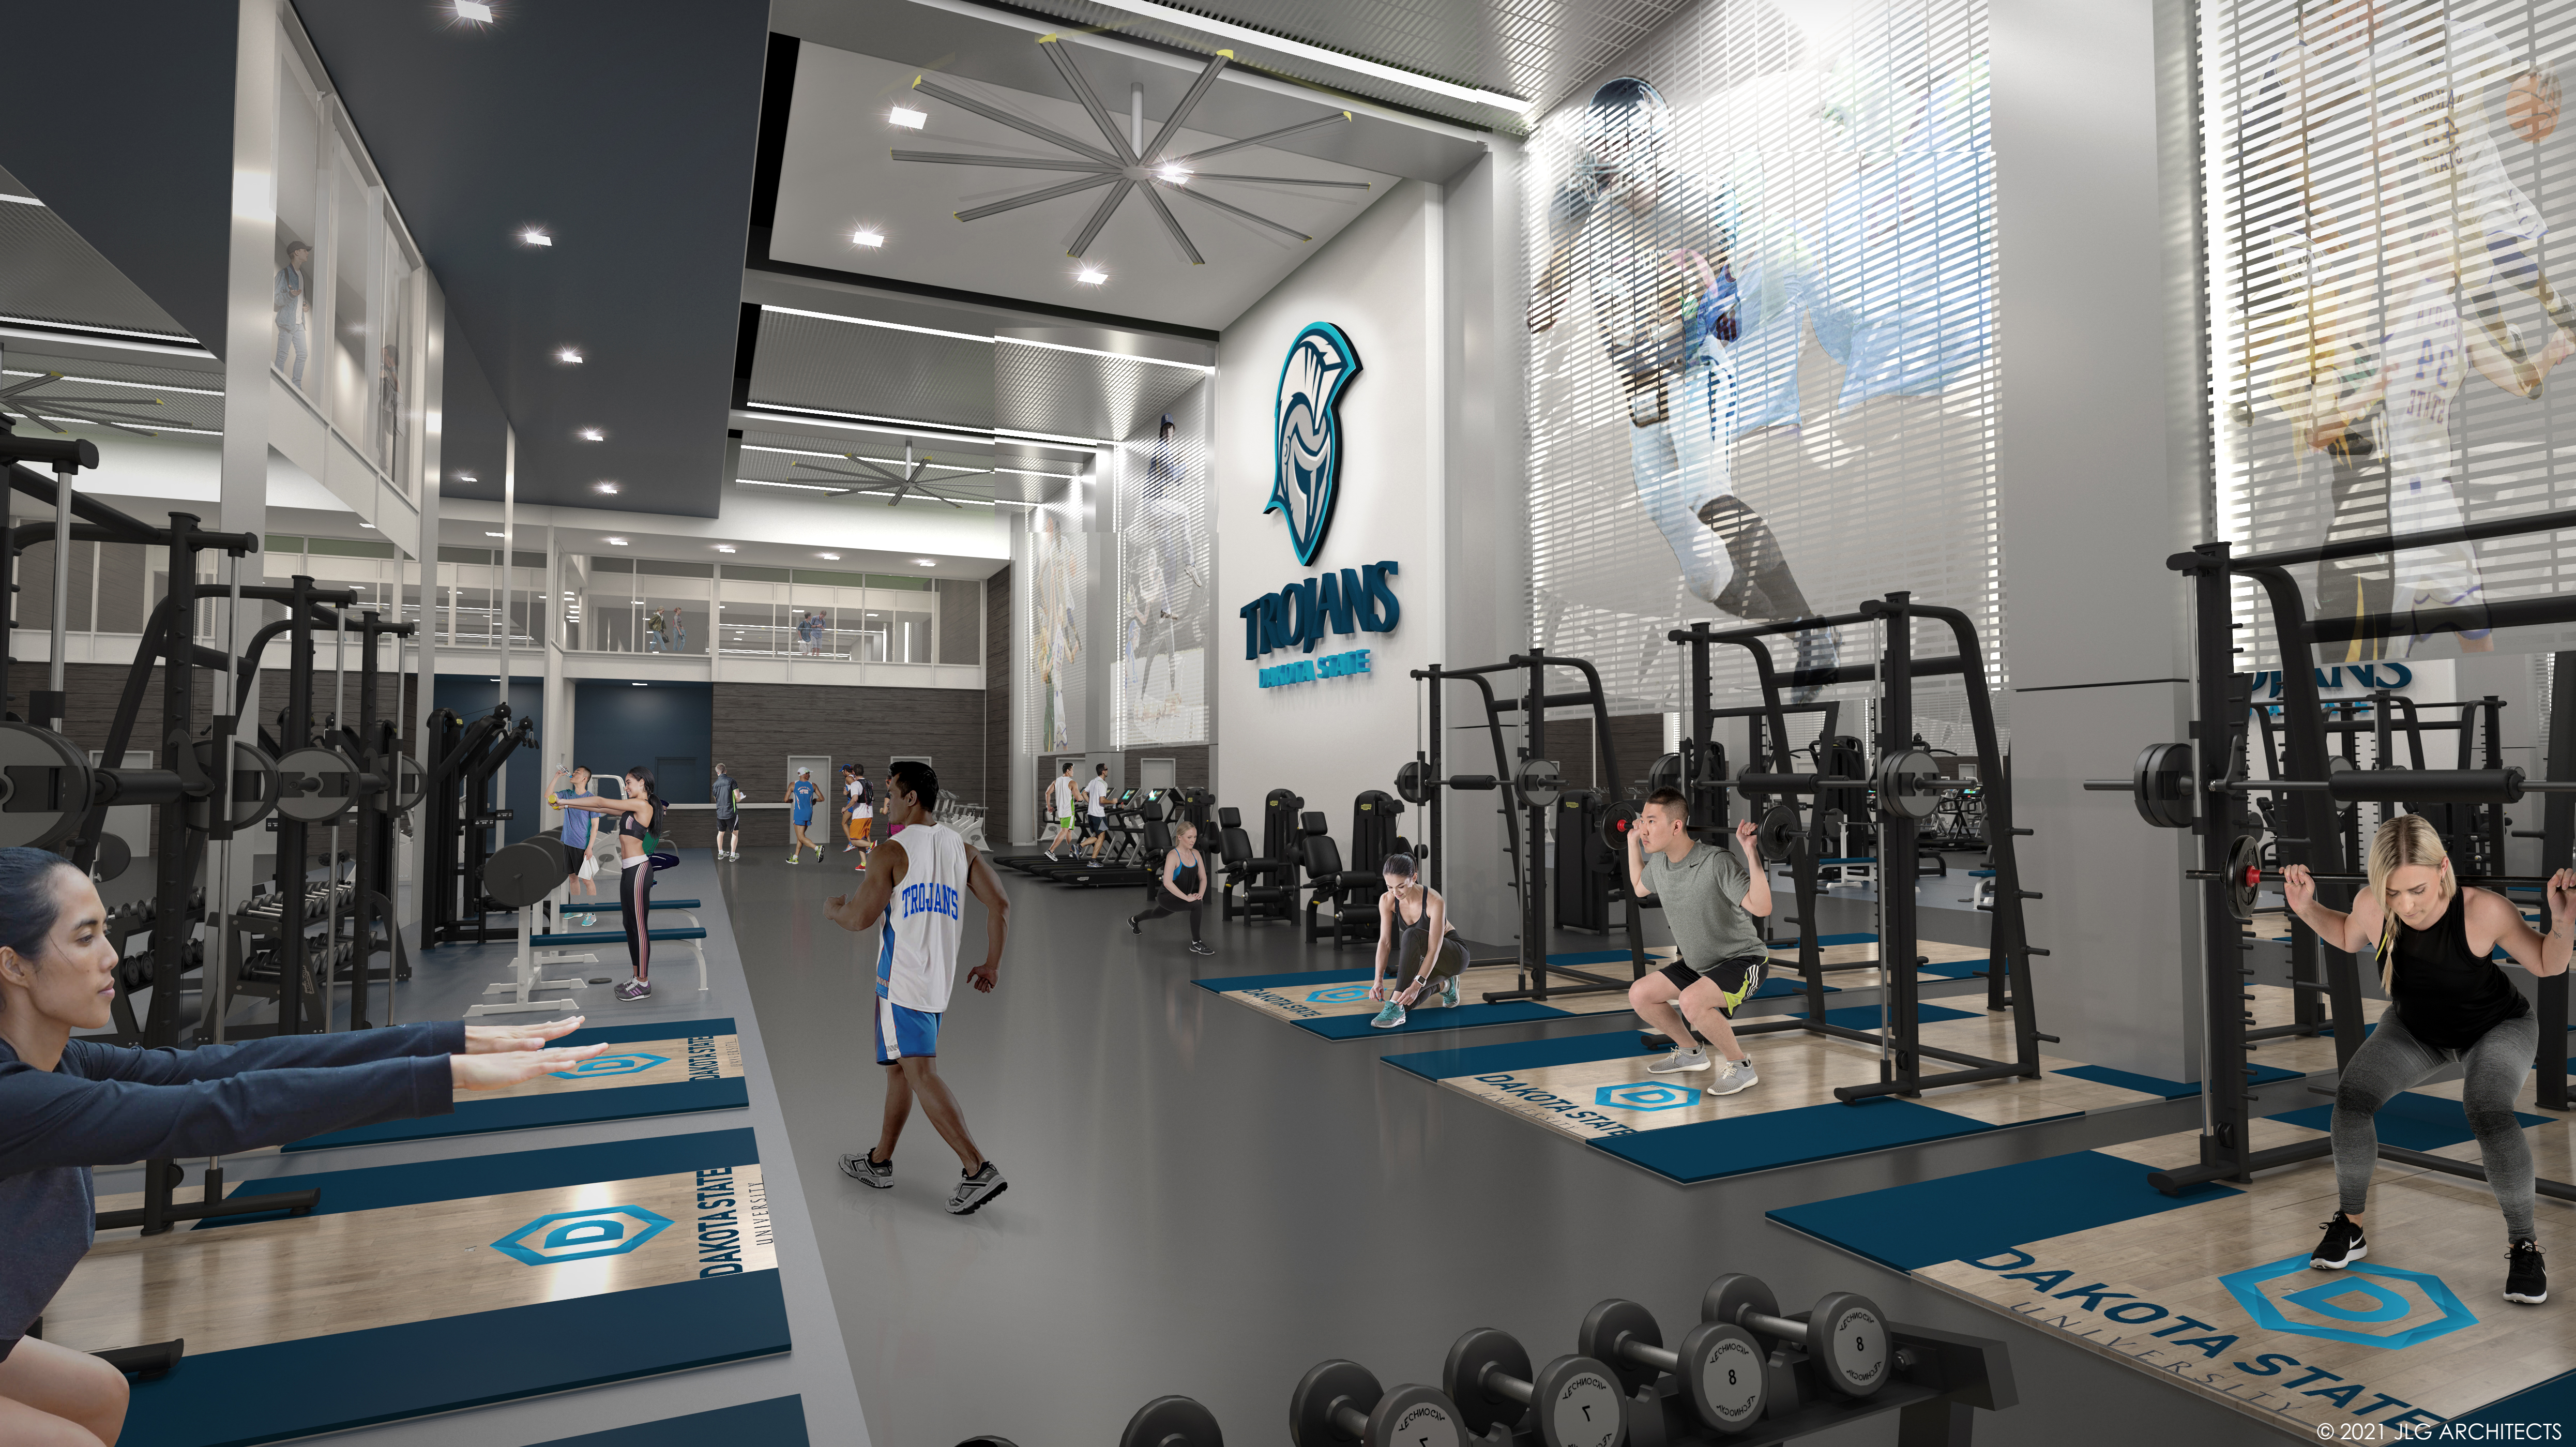 The Blankely athletics complex weightroom